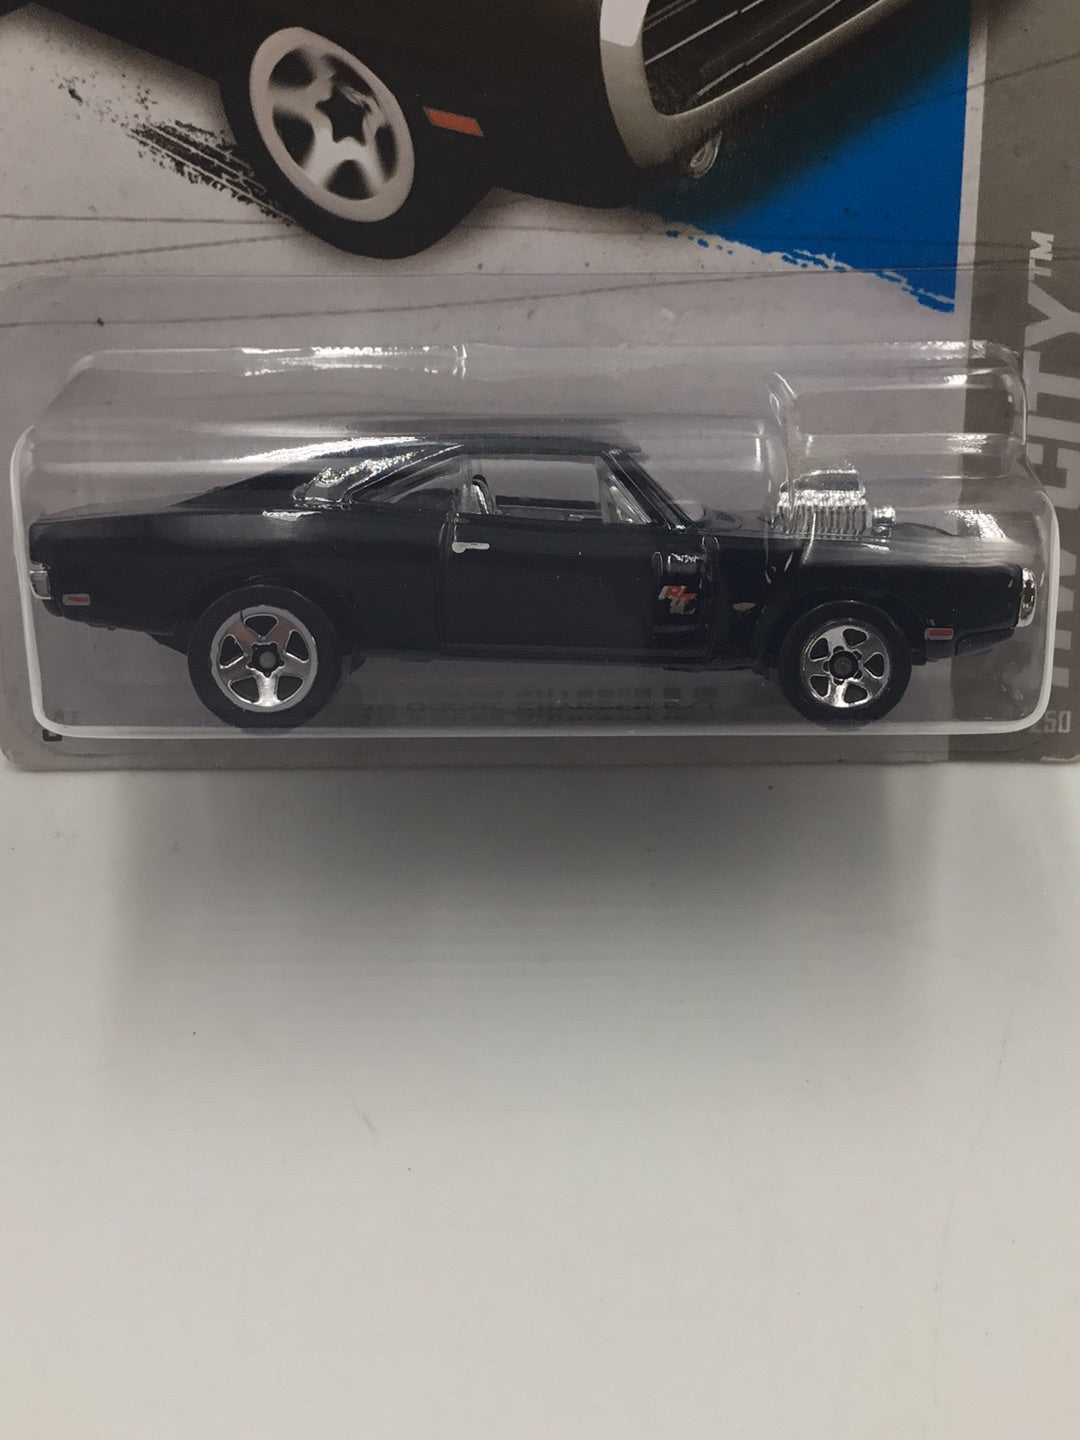 2013 Hot wheels fast and furious #3 70 Dodge Charger R/T with protector